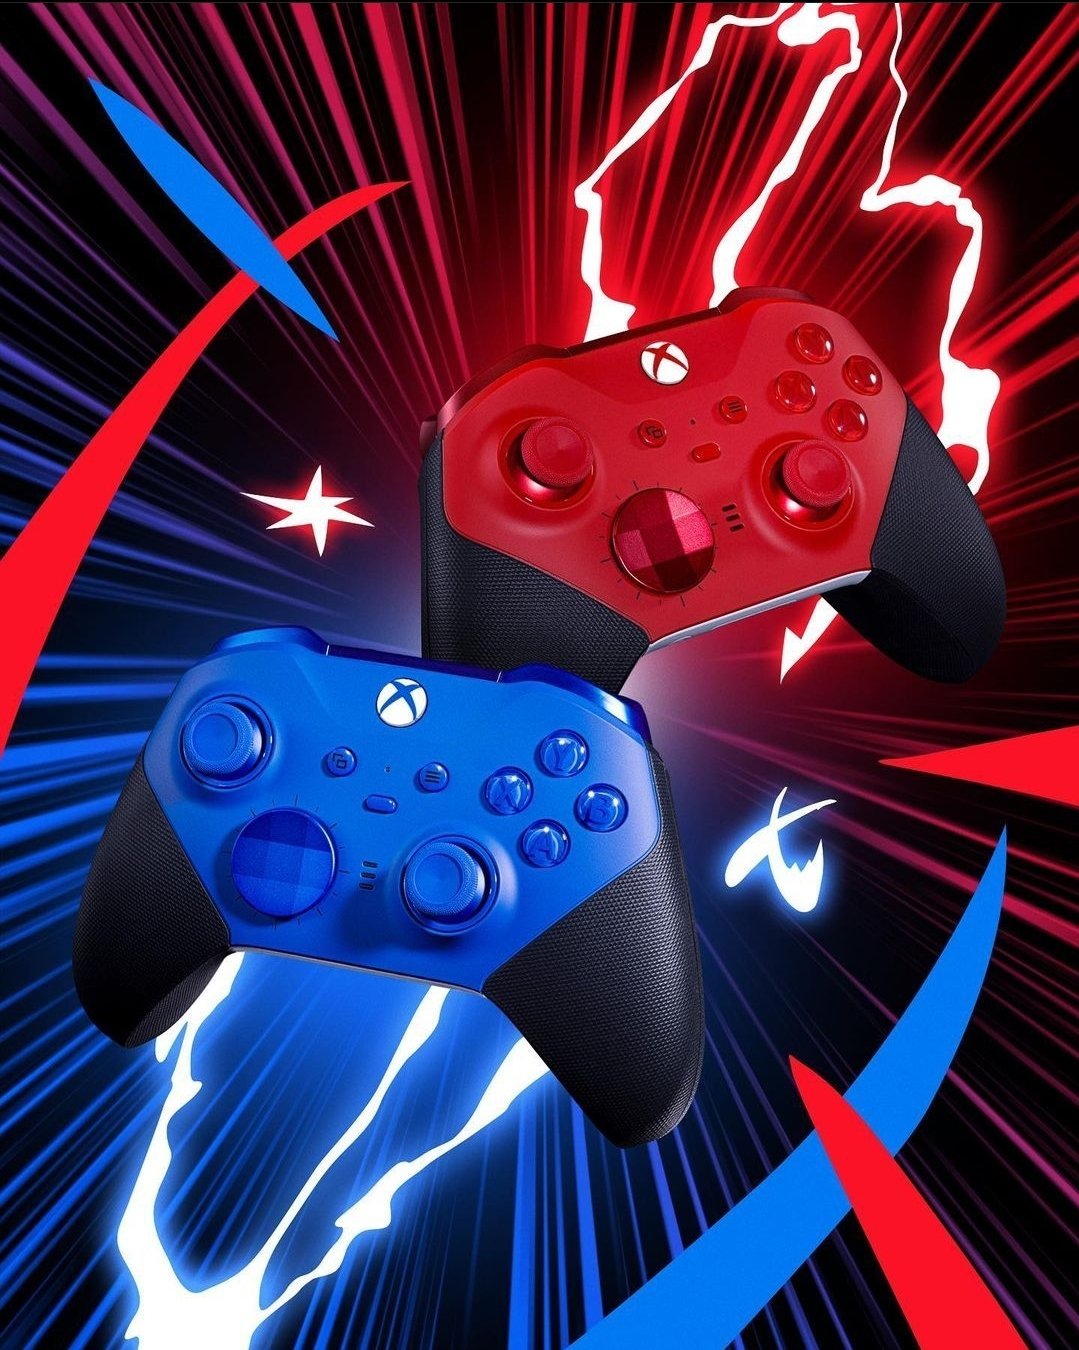 The Xbox Elite Series 2 controller is now available in red and blue